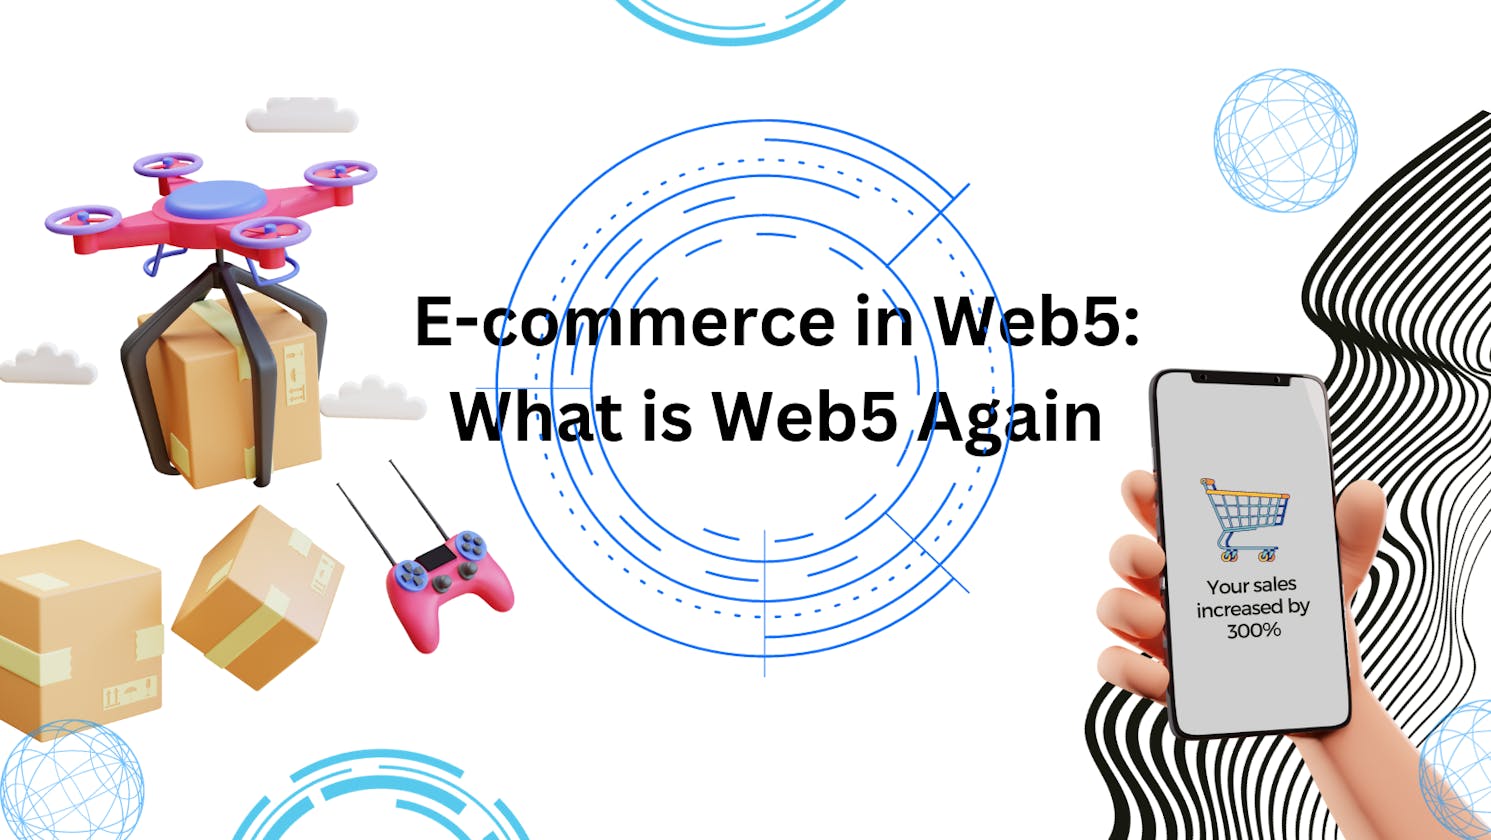 E-commerce in Web5: What is Web5 Again